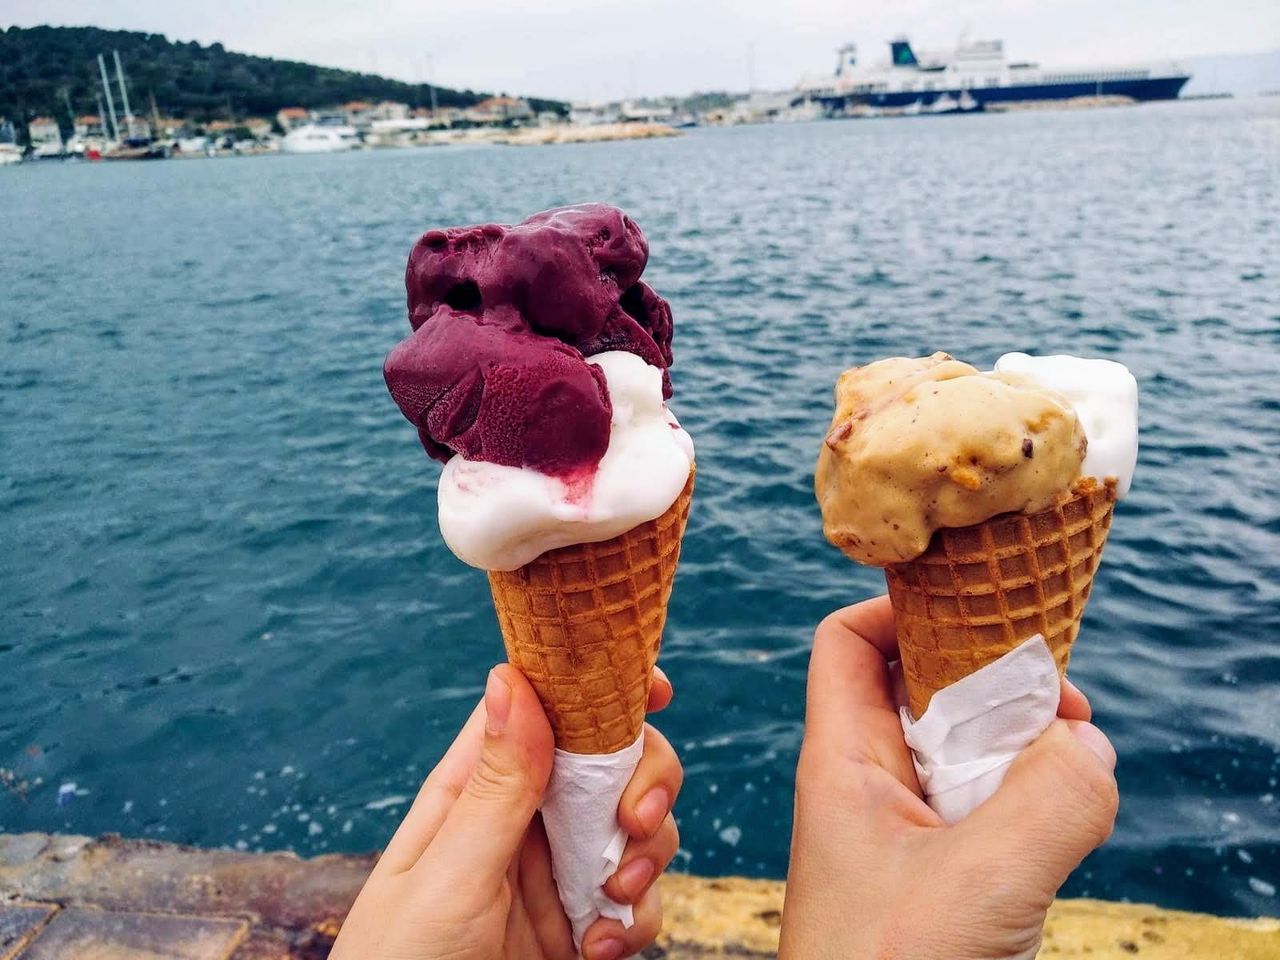 ice cream, human hand, sweet food, sweet, frozen food, hand, frozen, holding, ice cream cone, dairy product, human body part, cone, real people, water, dessert, focus on foreground, food and drink, food, indulgence, freshness, temptation, finger, outdoors, human limb